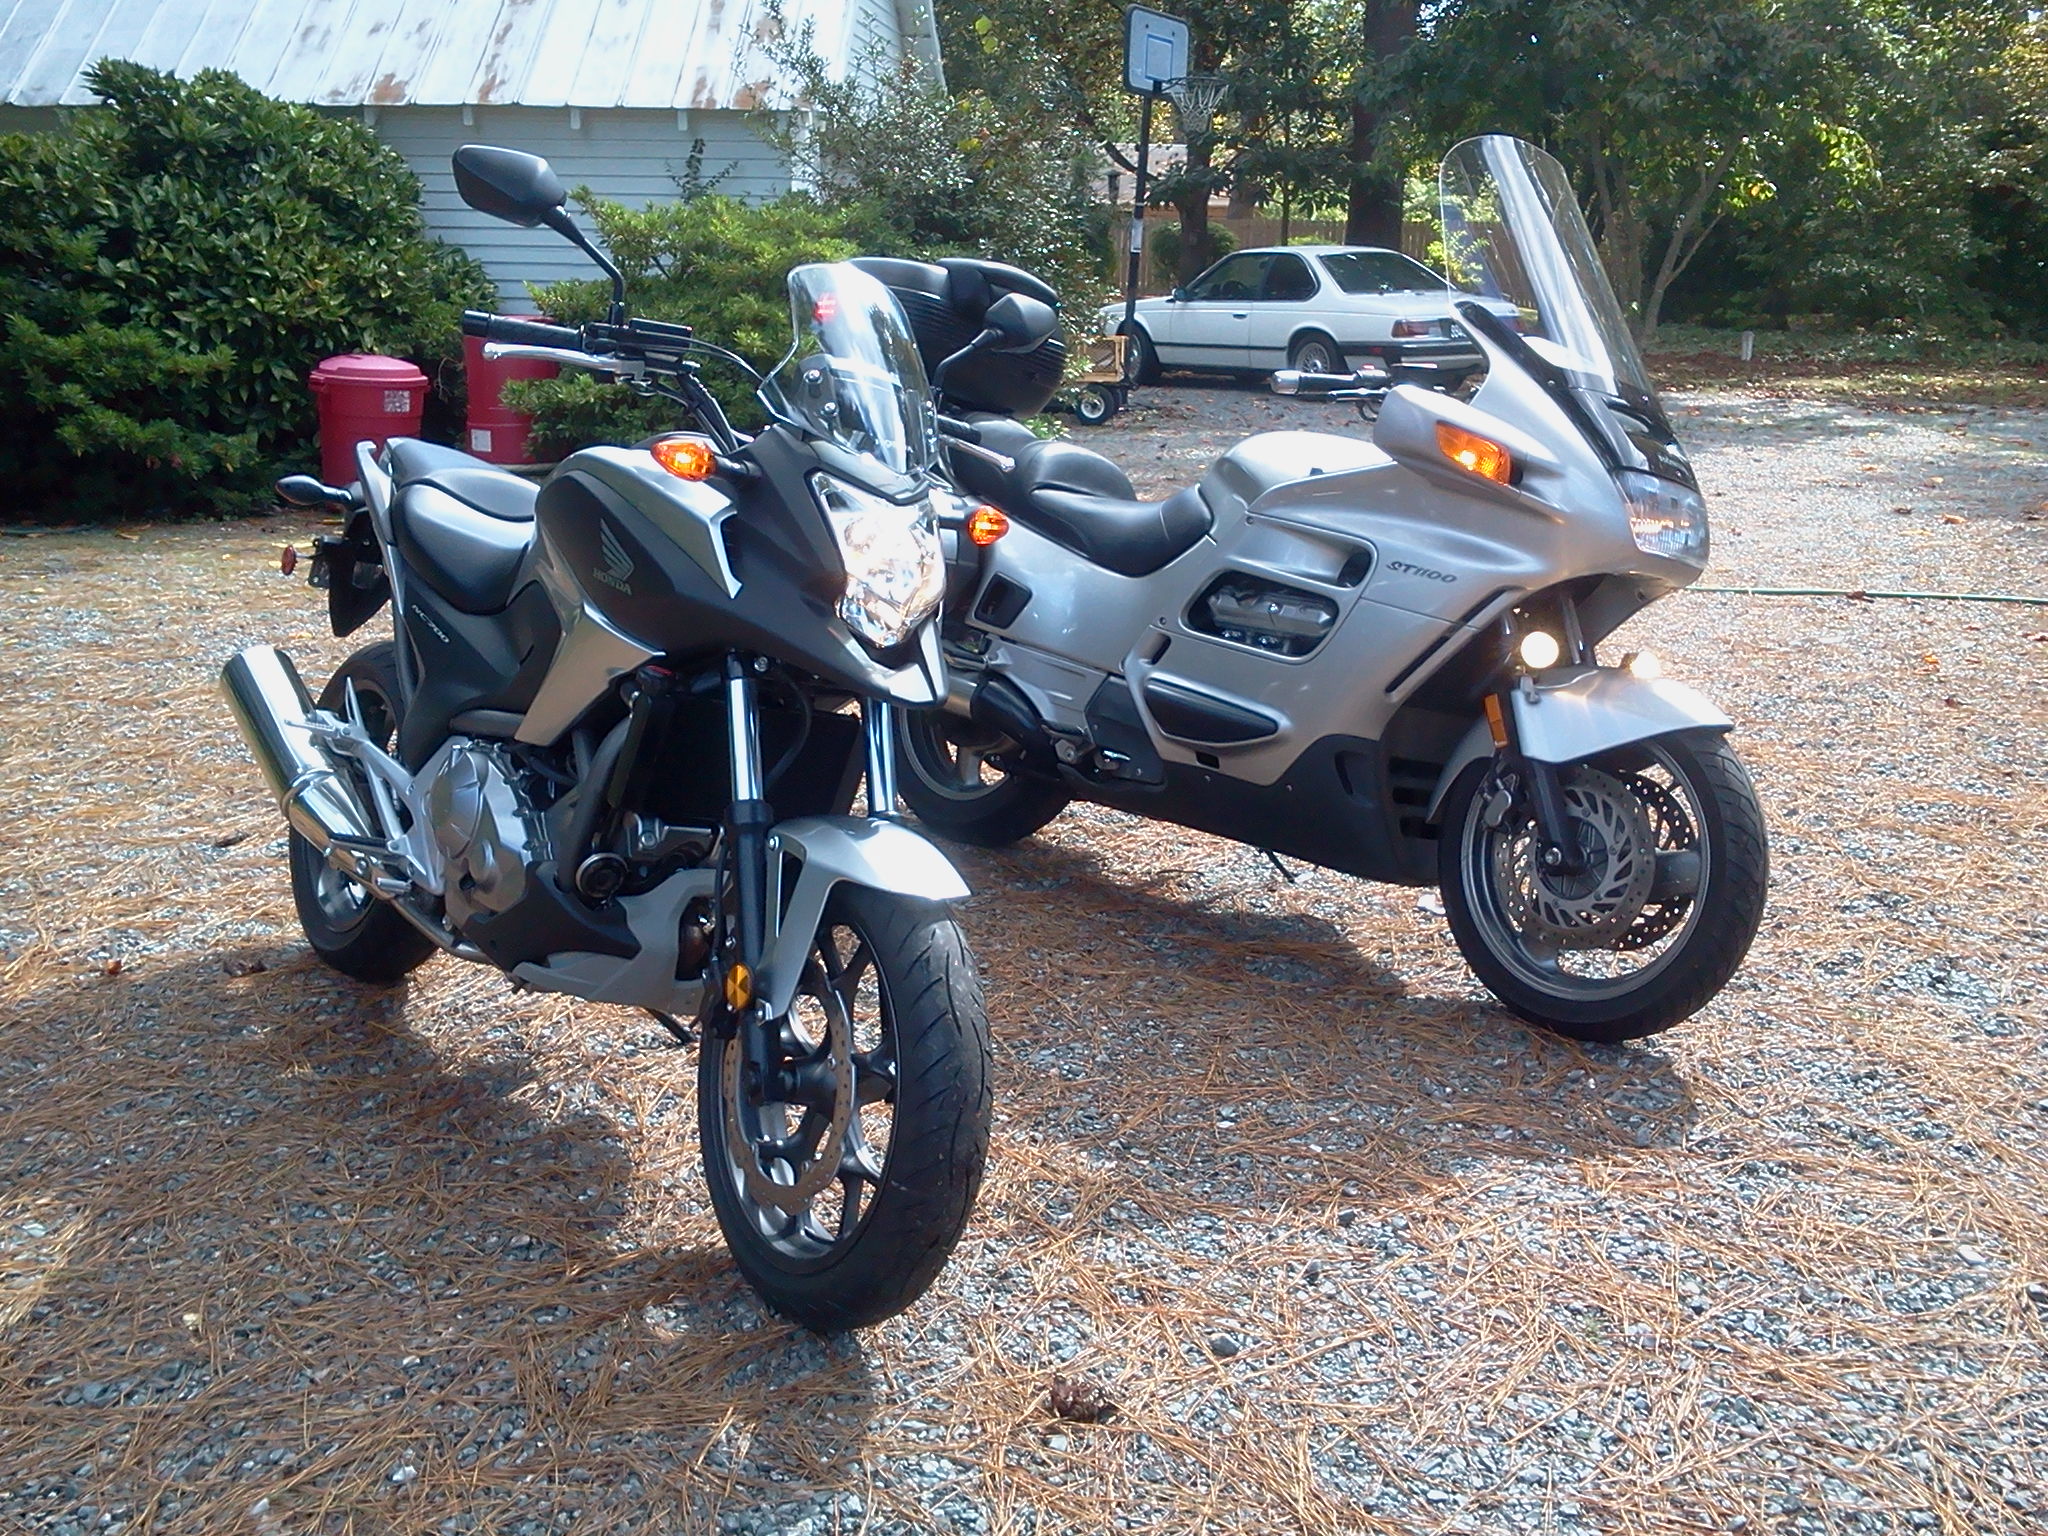 NC700X and Big Brother ST1100